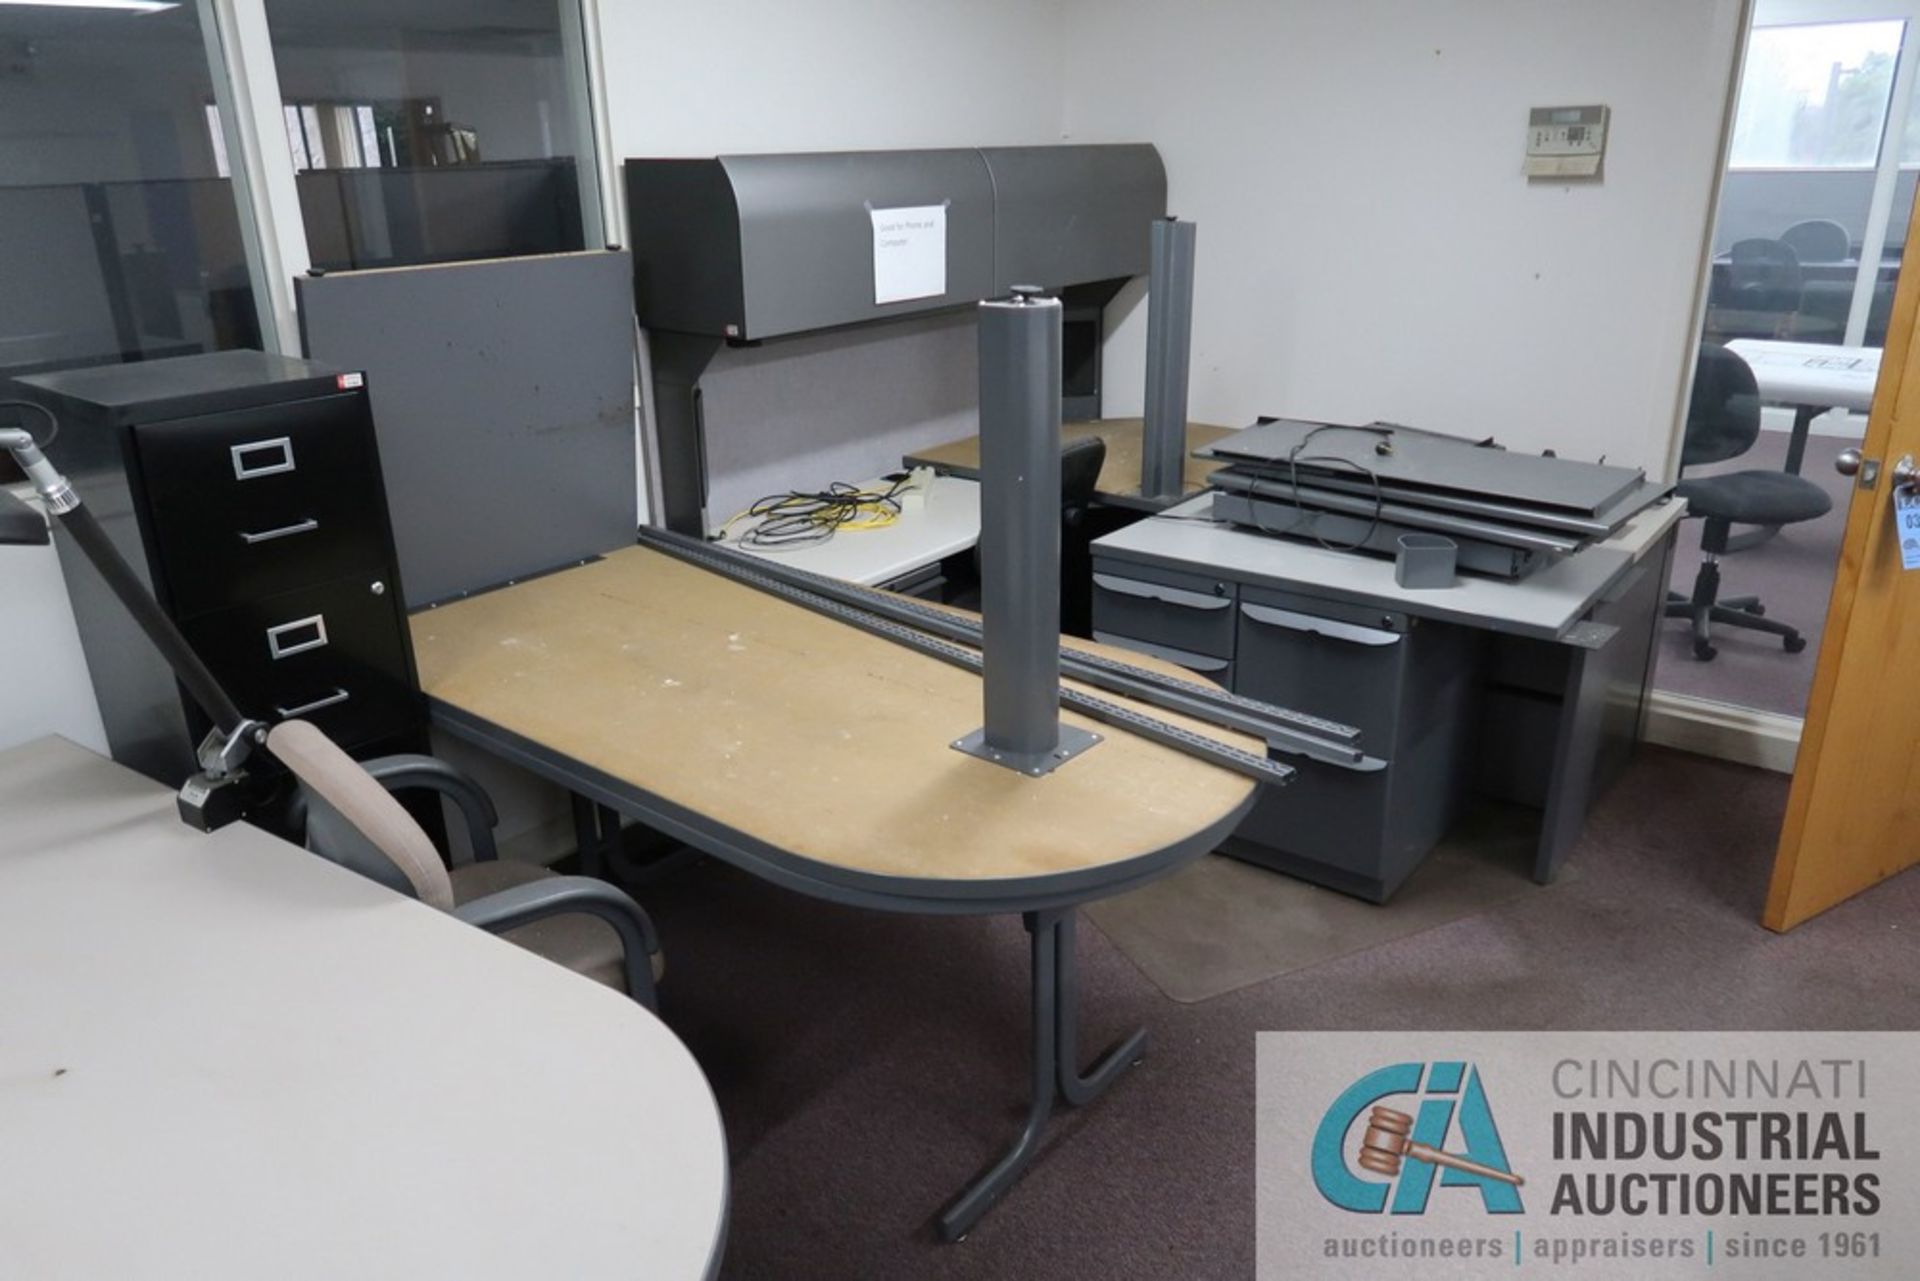 (LOT) CONTENTS OF OFFICE INCLUDING (3) U-SHAPED DESKS, 10' LONG X 6' WIDE TABEL WITH (4) 5-DRAWER - Image 2 of 5